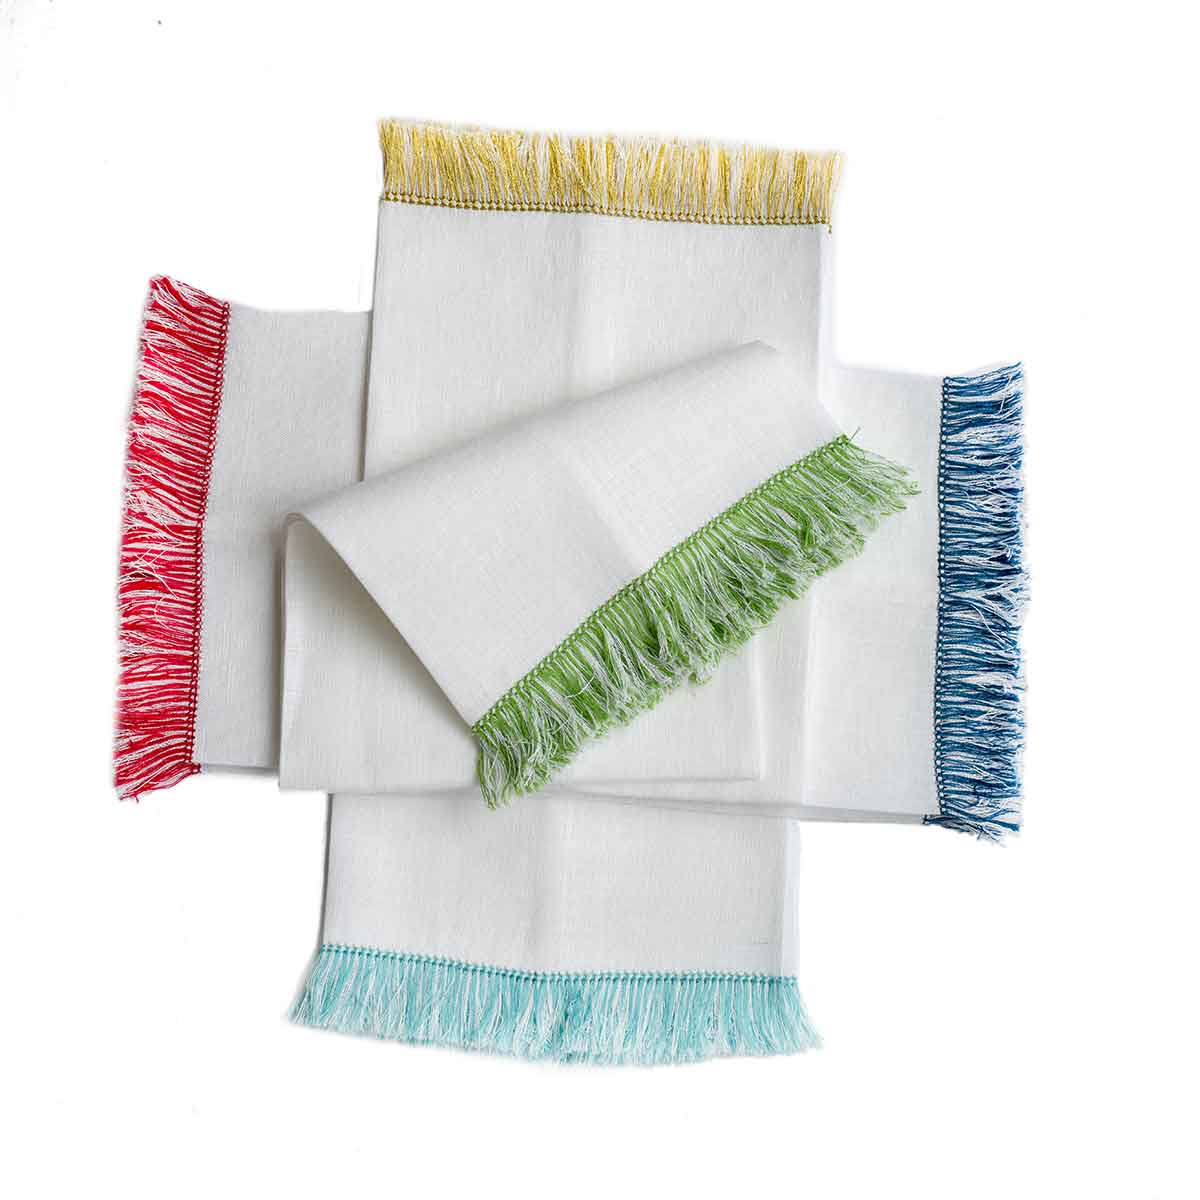 Fringe Benefits Guest Towel | Garden Folly Fine Linens - hand towels for embroidering, fancy linen hand towels, fancy linen guest towels